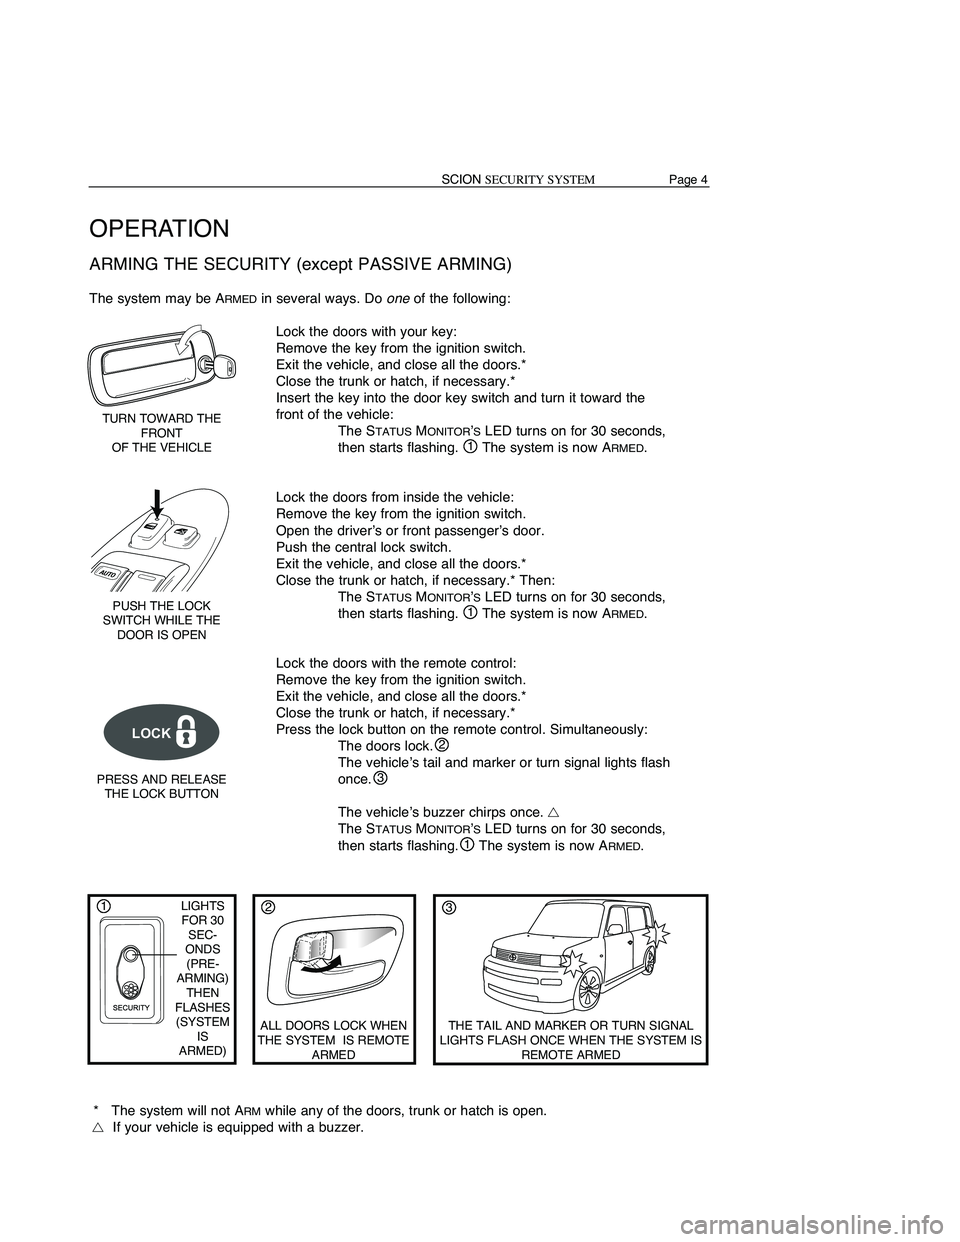 TOYOTA xB 2009  Accessories, Audio & Navigation (in English) Page7SCIONSECURITY SYSTEM
OPERATION
AUTOMAT ICREARMING
When youunlock thedoors usingtheremote control, theScion Security isDISARMEDat the same
time. However, ifyou donot open adoor within 30seconds, t